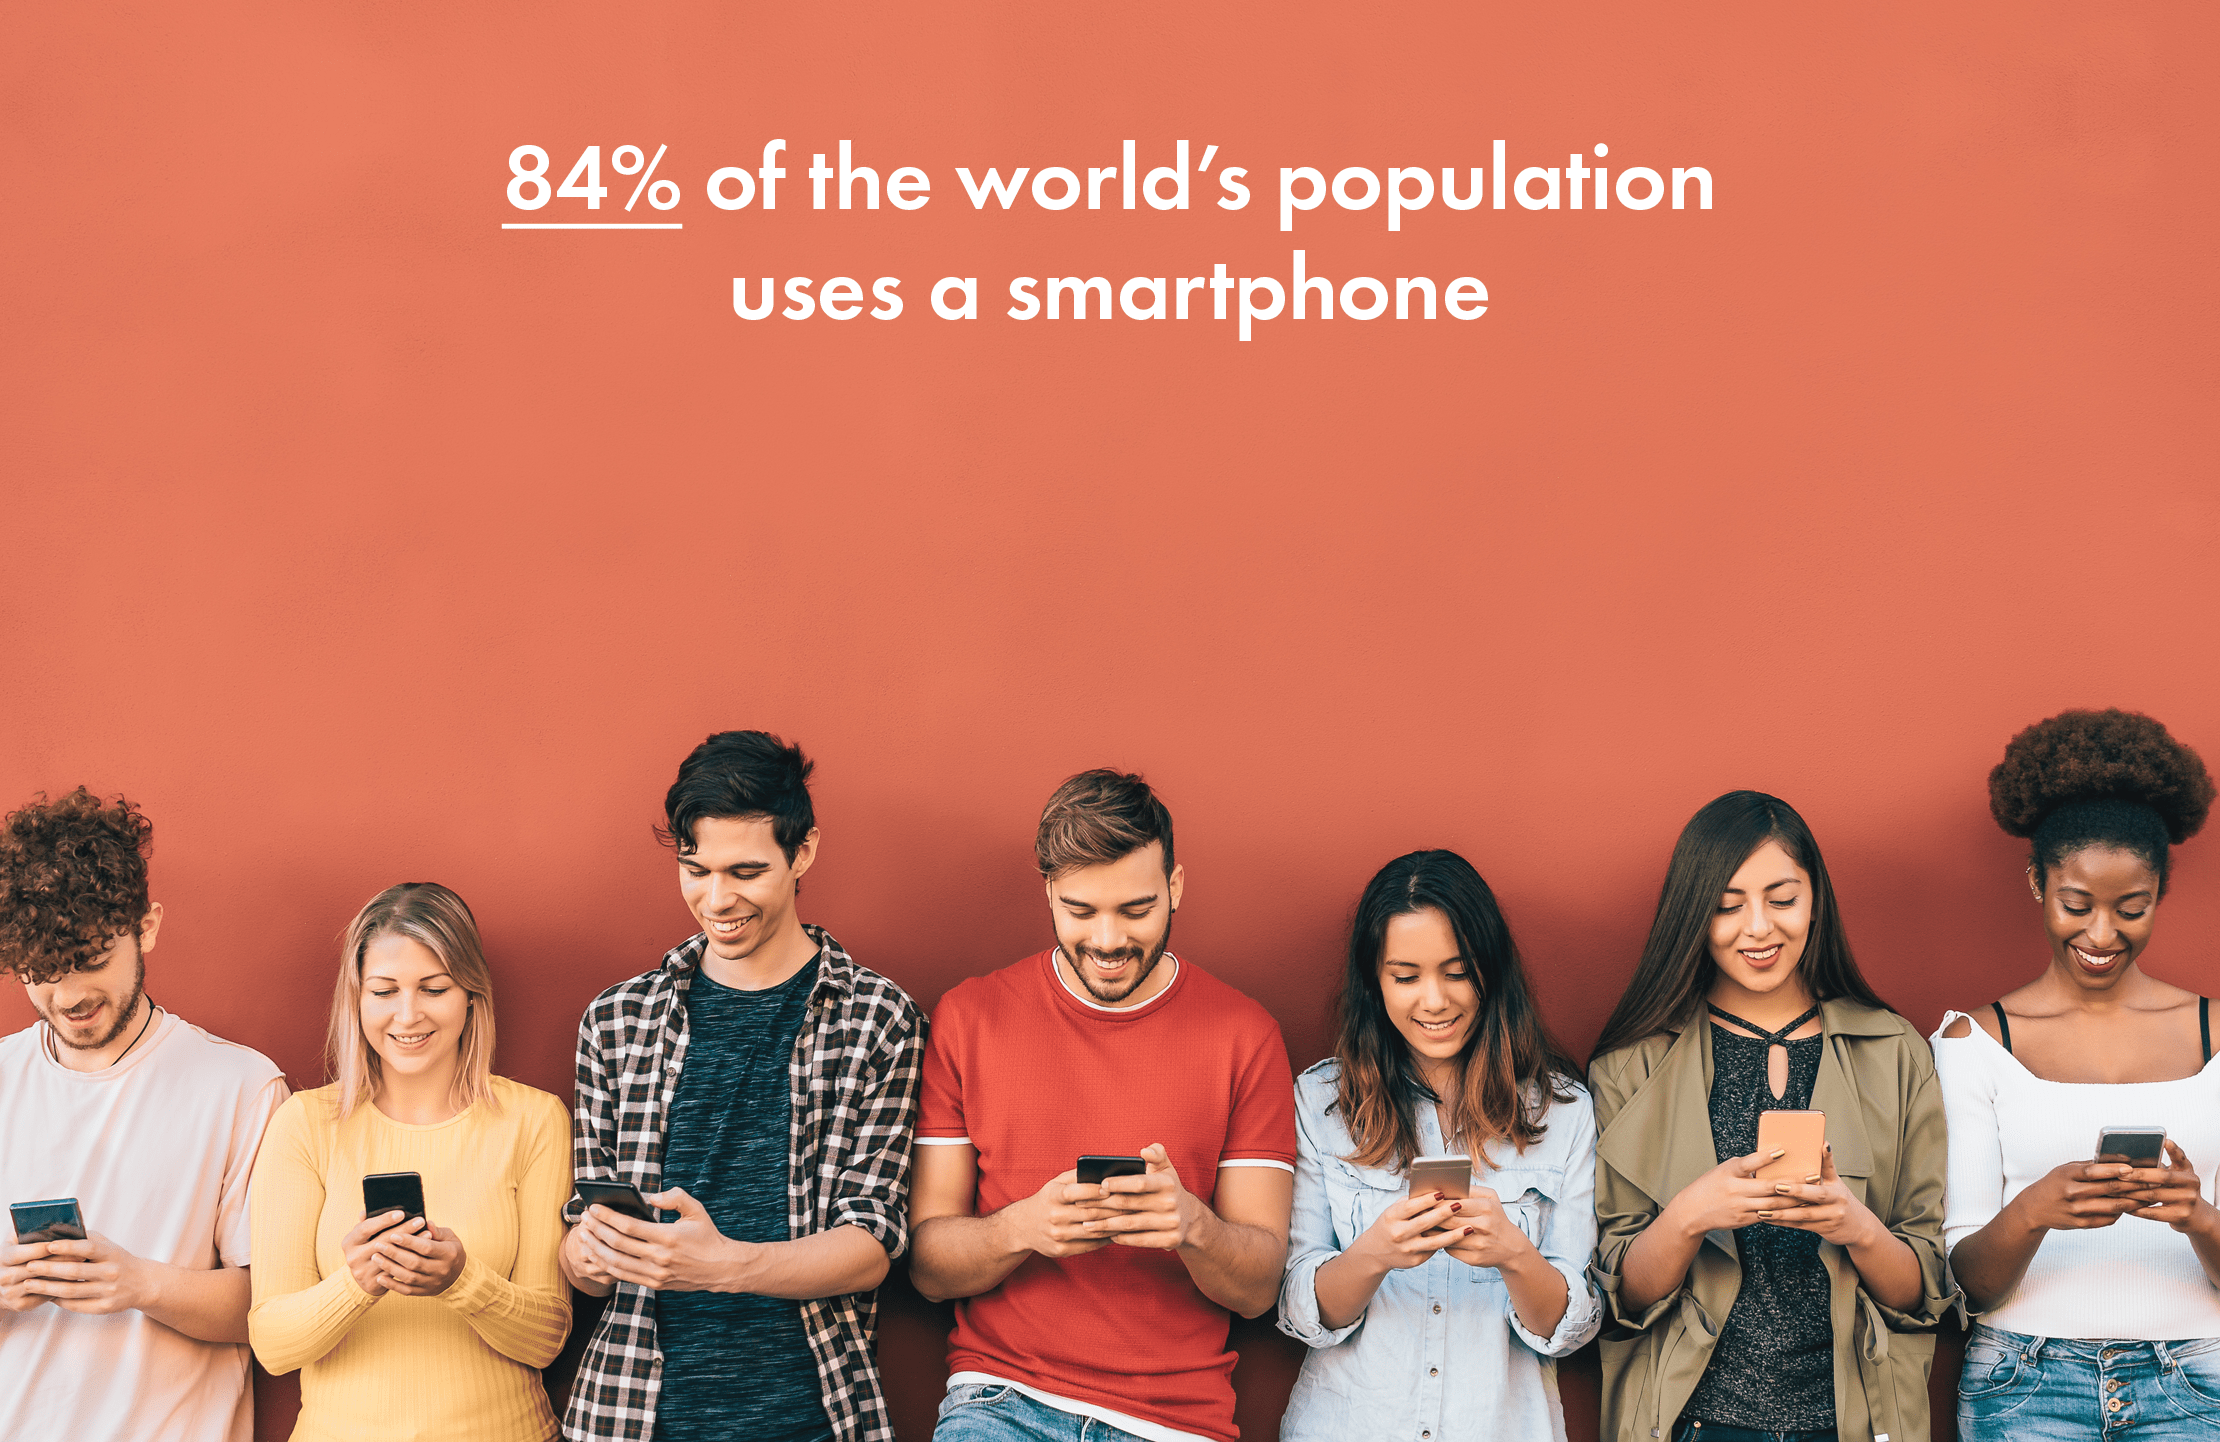 83.72% of the world’s population uses a smartphone